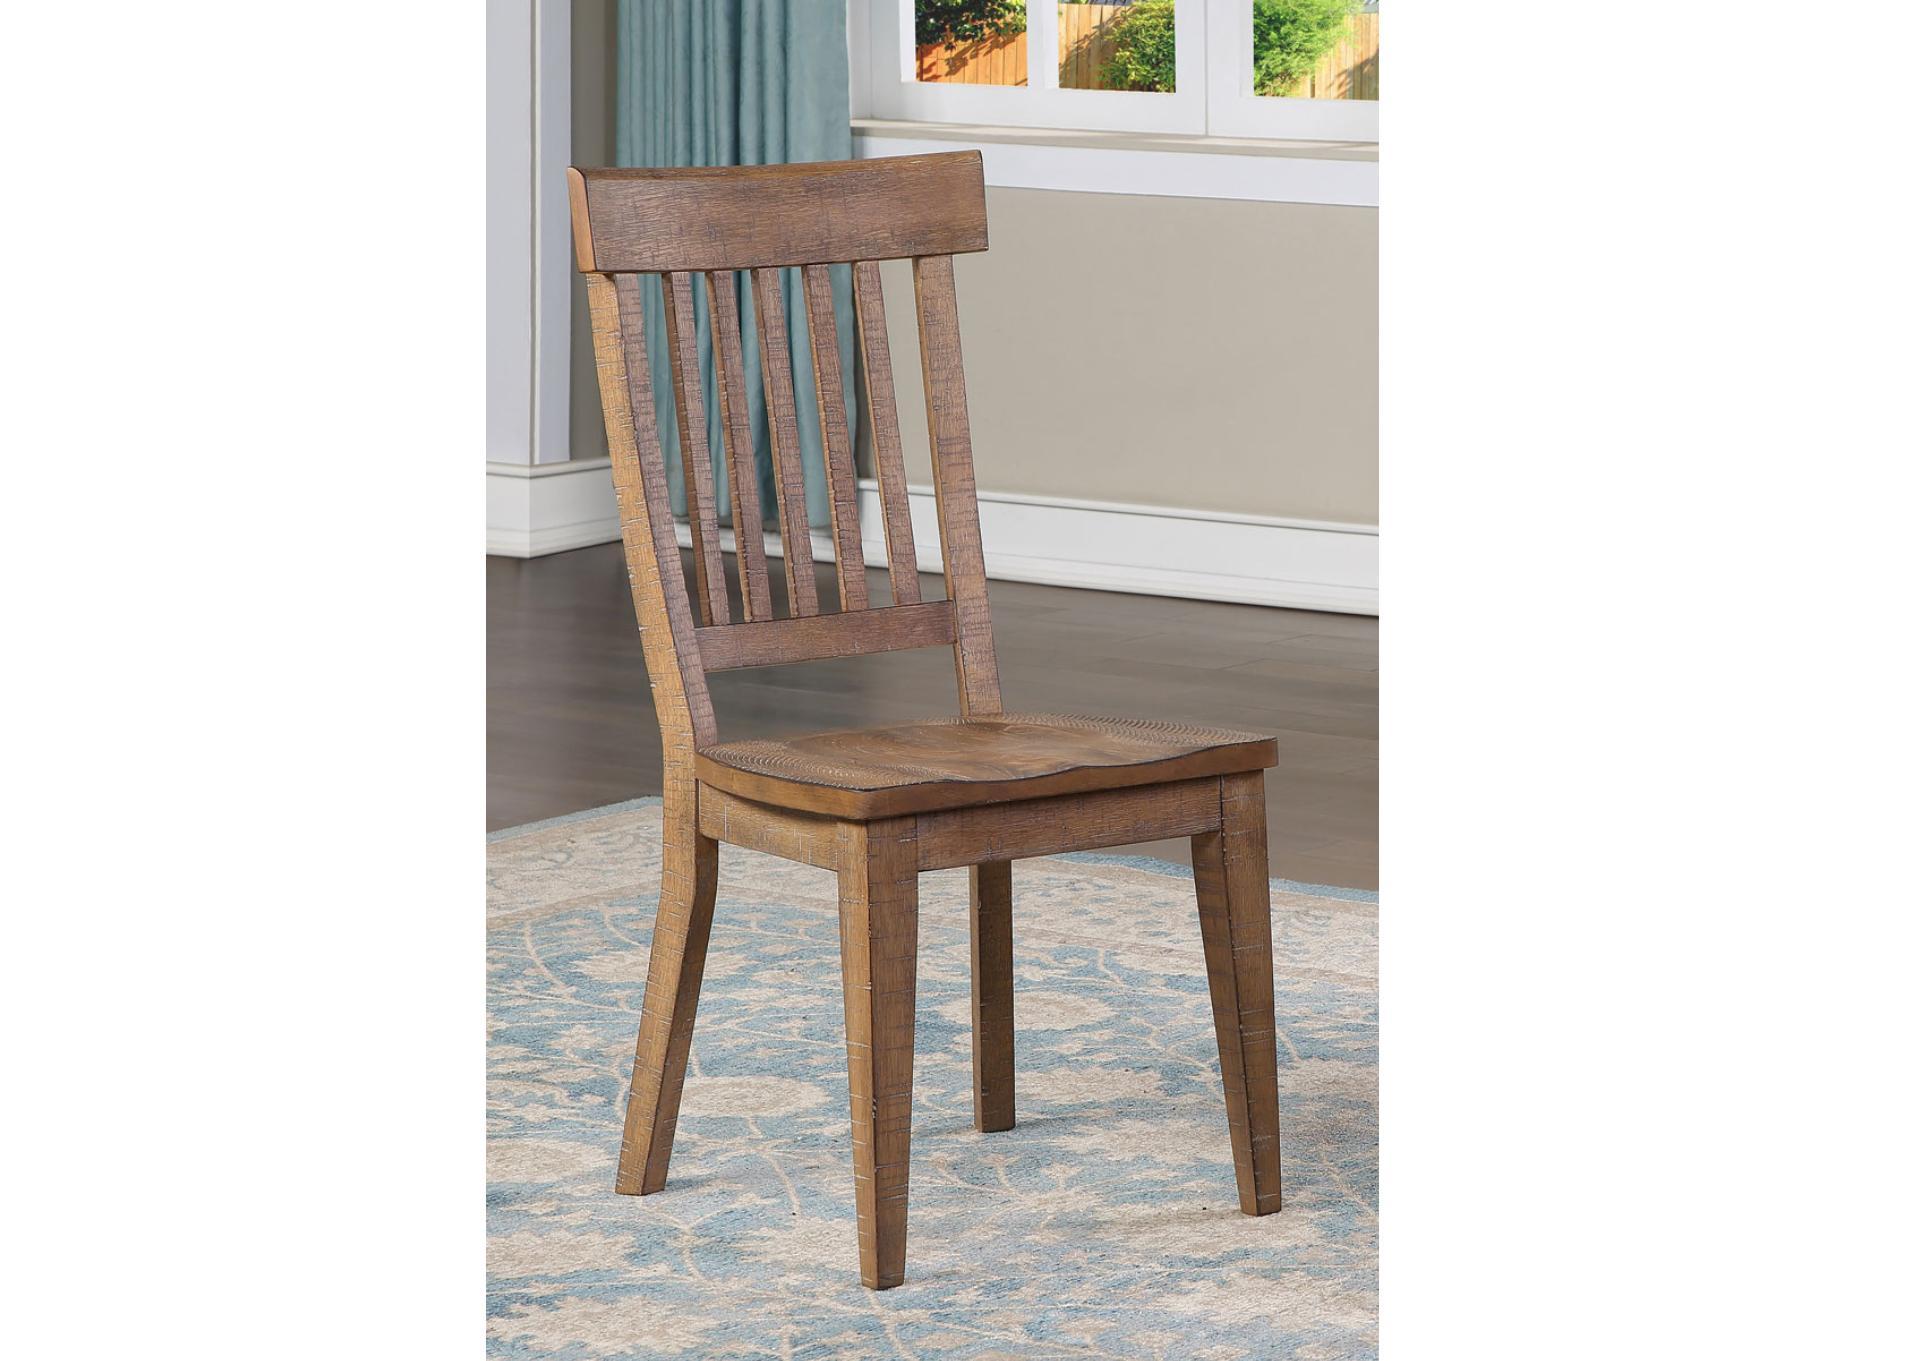 RIVERDALE DINING SIDE CHAIR,STEVE SILVER COMPANY